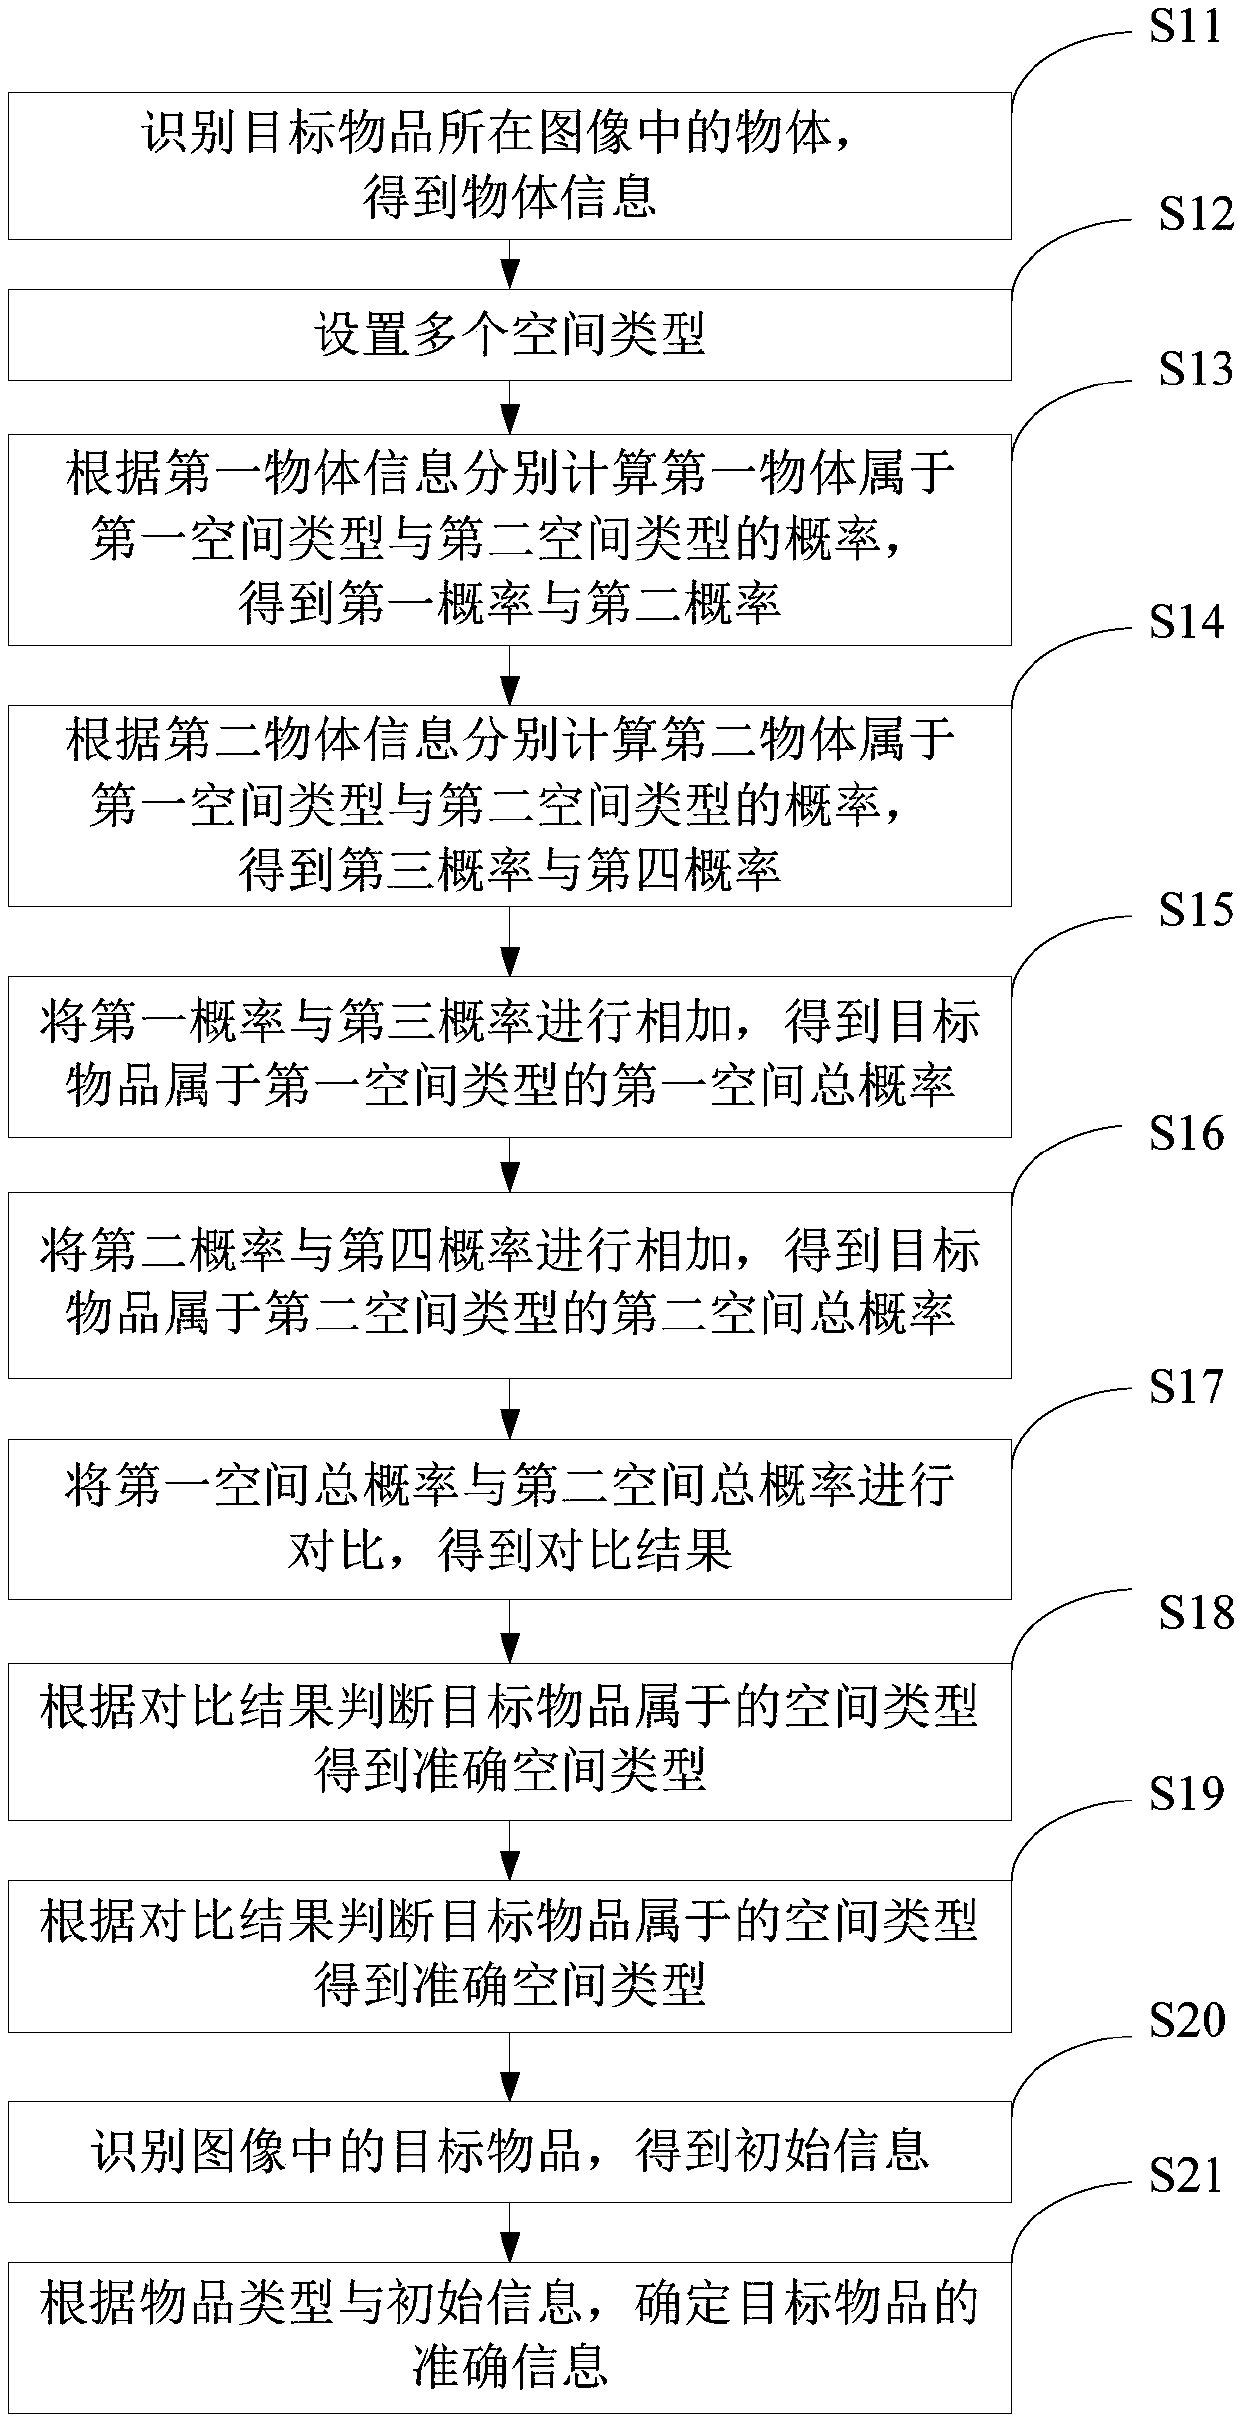 Article identification method and system, and electronic device